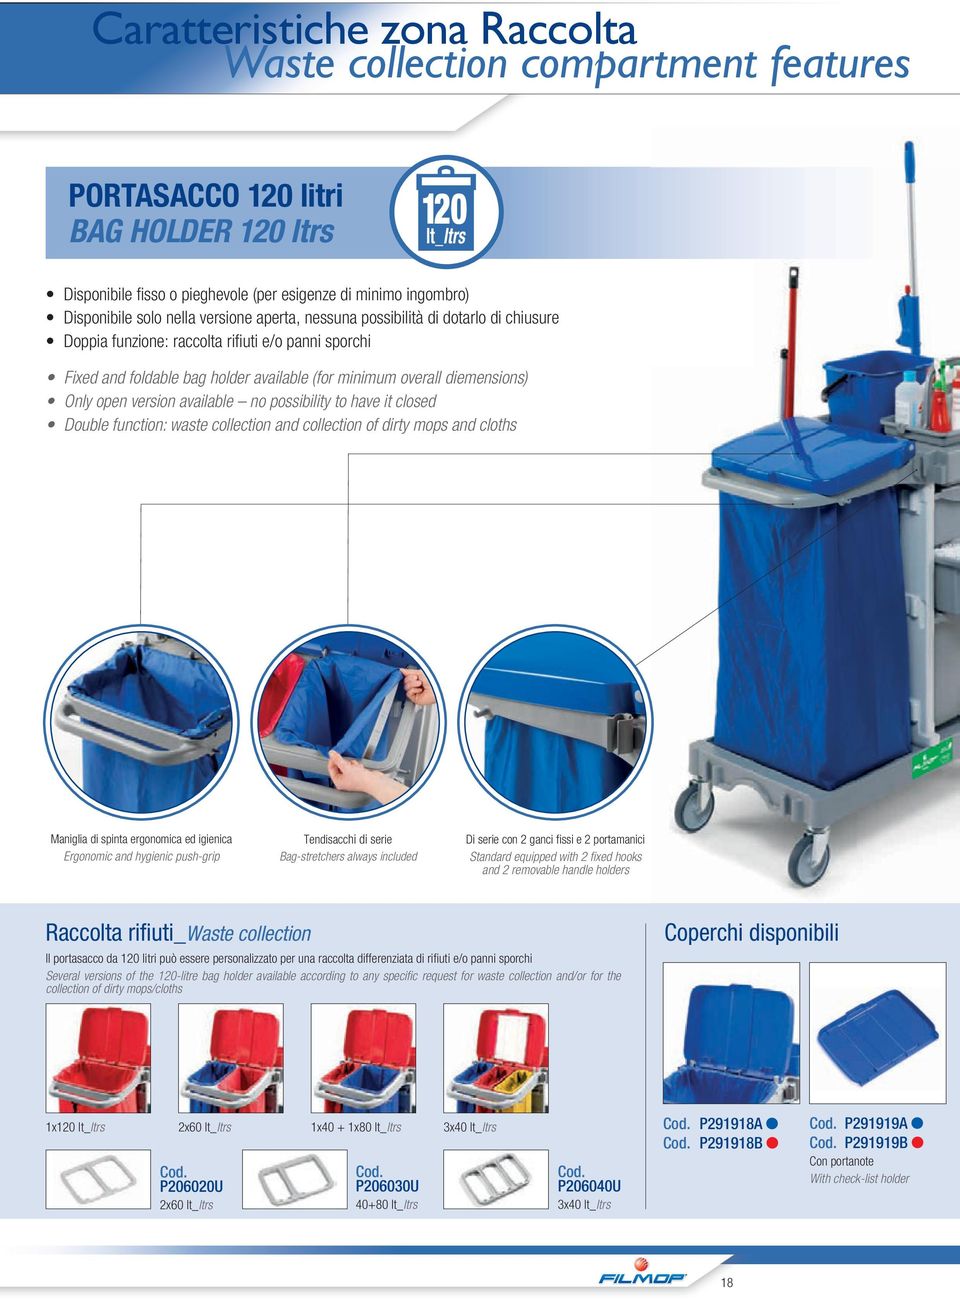 Only open version available no possibility to have it closed Double function: waste collection and collection of dirty mops and cloths Maniglia di spinta ergonomica ed igienica Ergonomic and hygienic